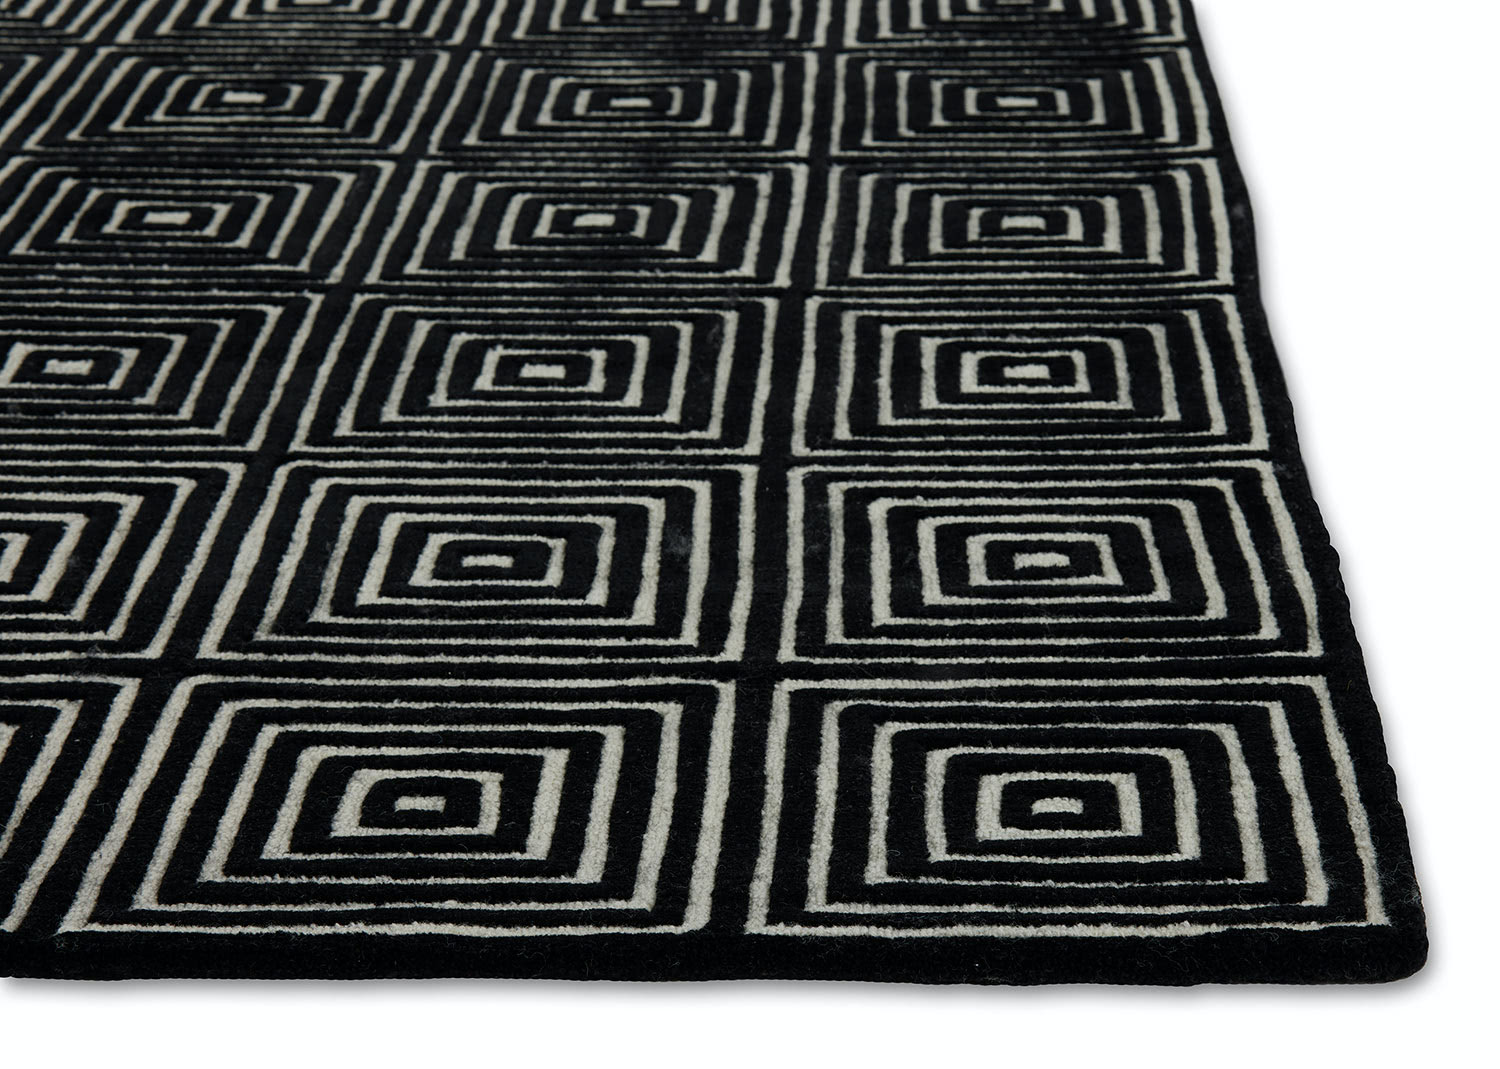 A corner of a black and white, patterned, modern area rug called Duke Vivid by Angela Adams